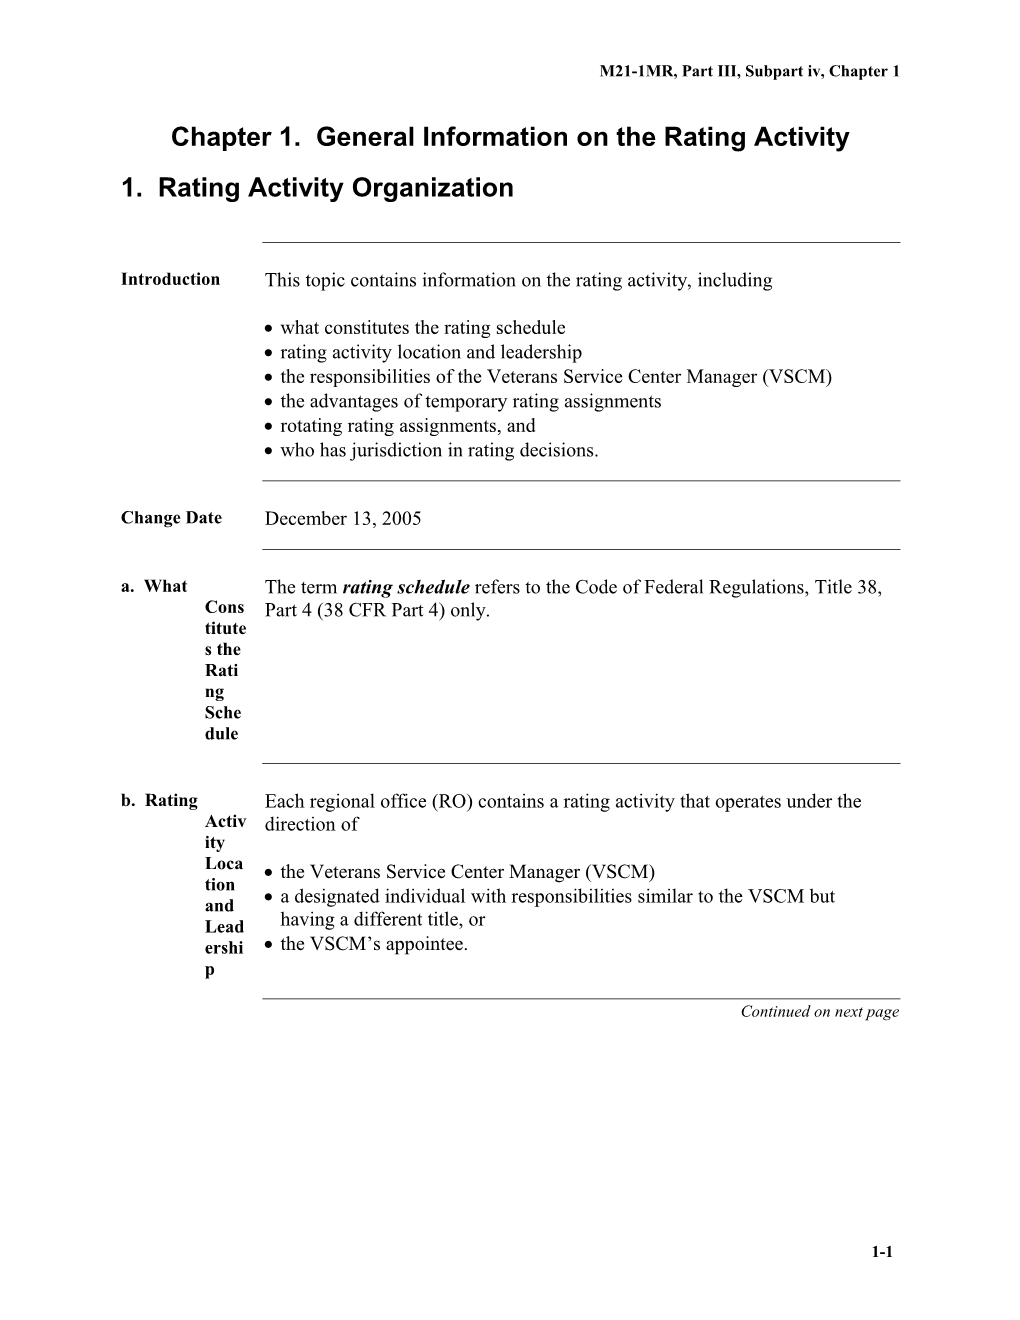 M21-1MR, Part III, Subpart Iv, Chapter 1. General Information on the Rating Activity